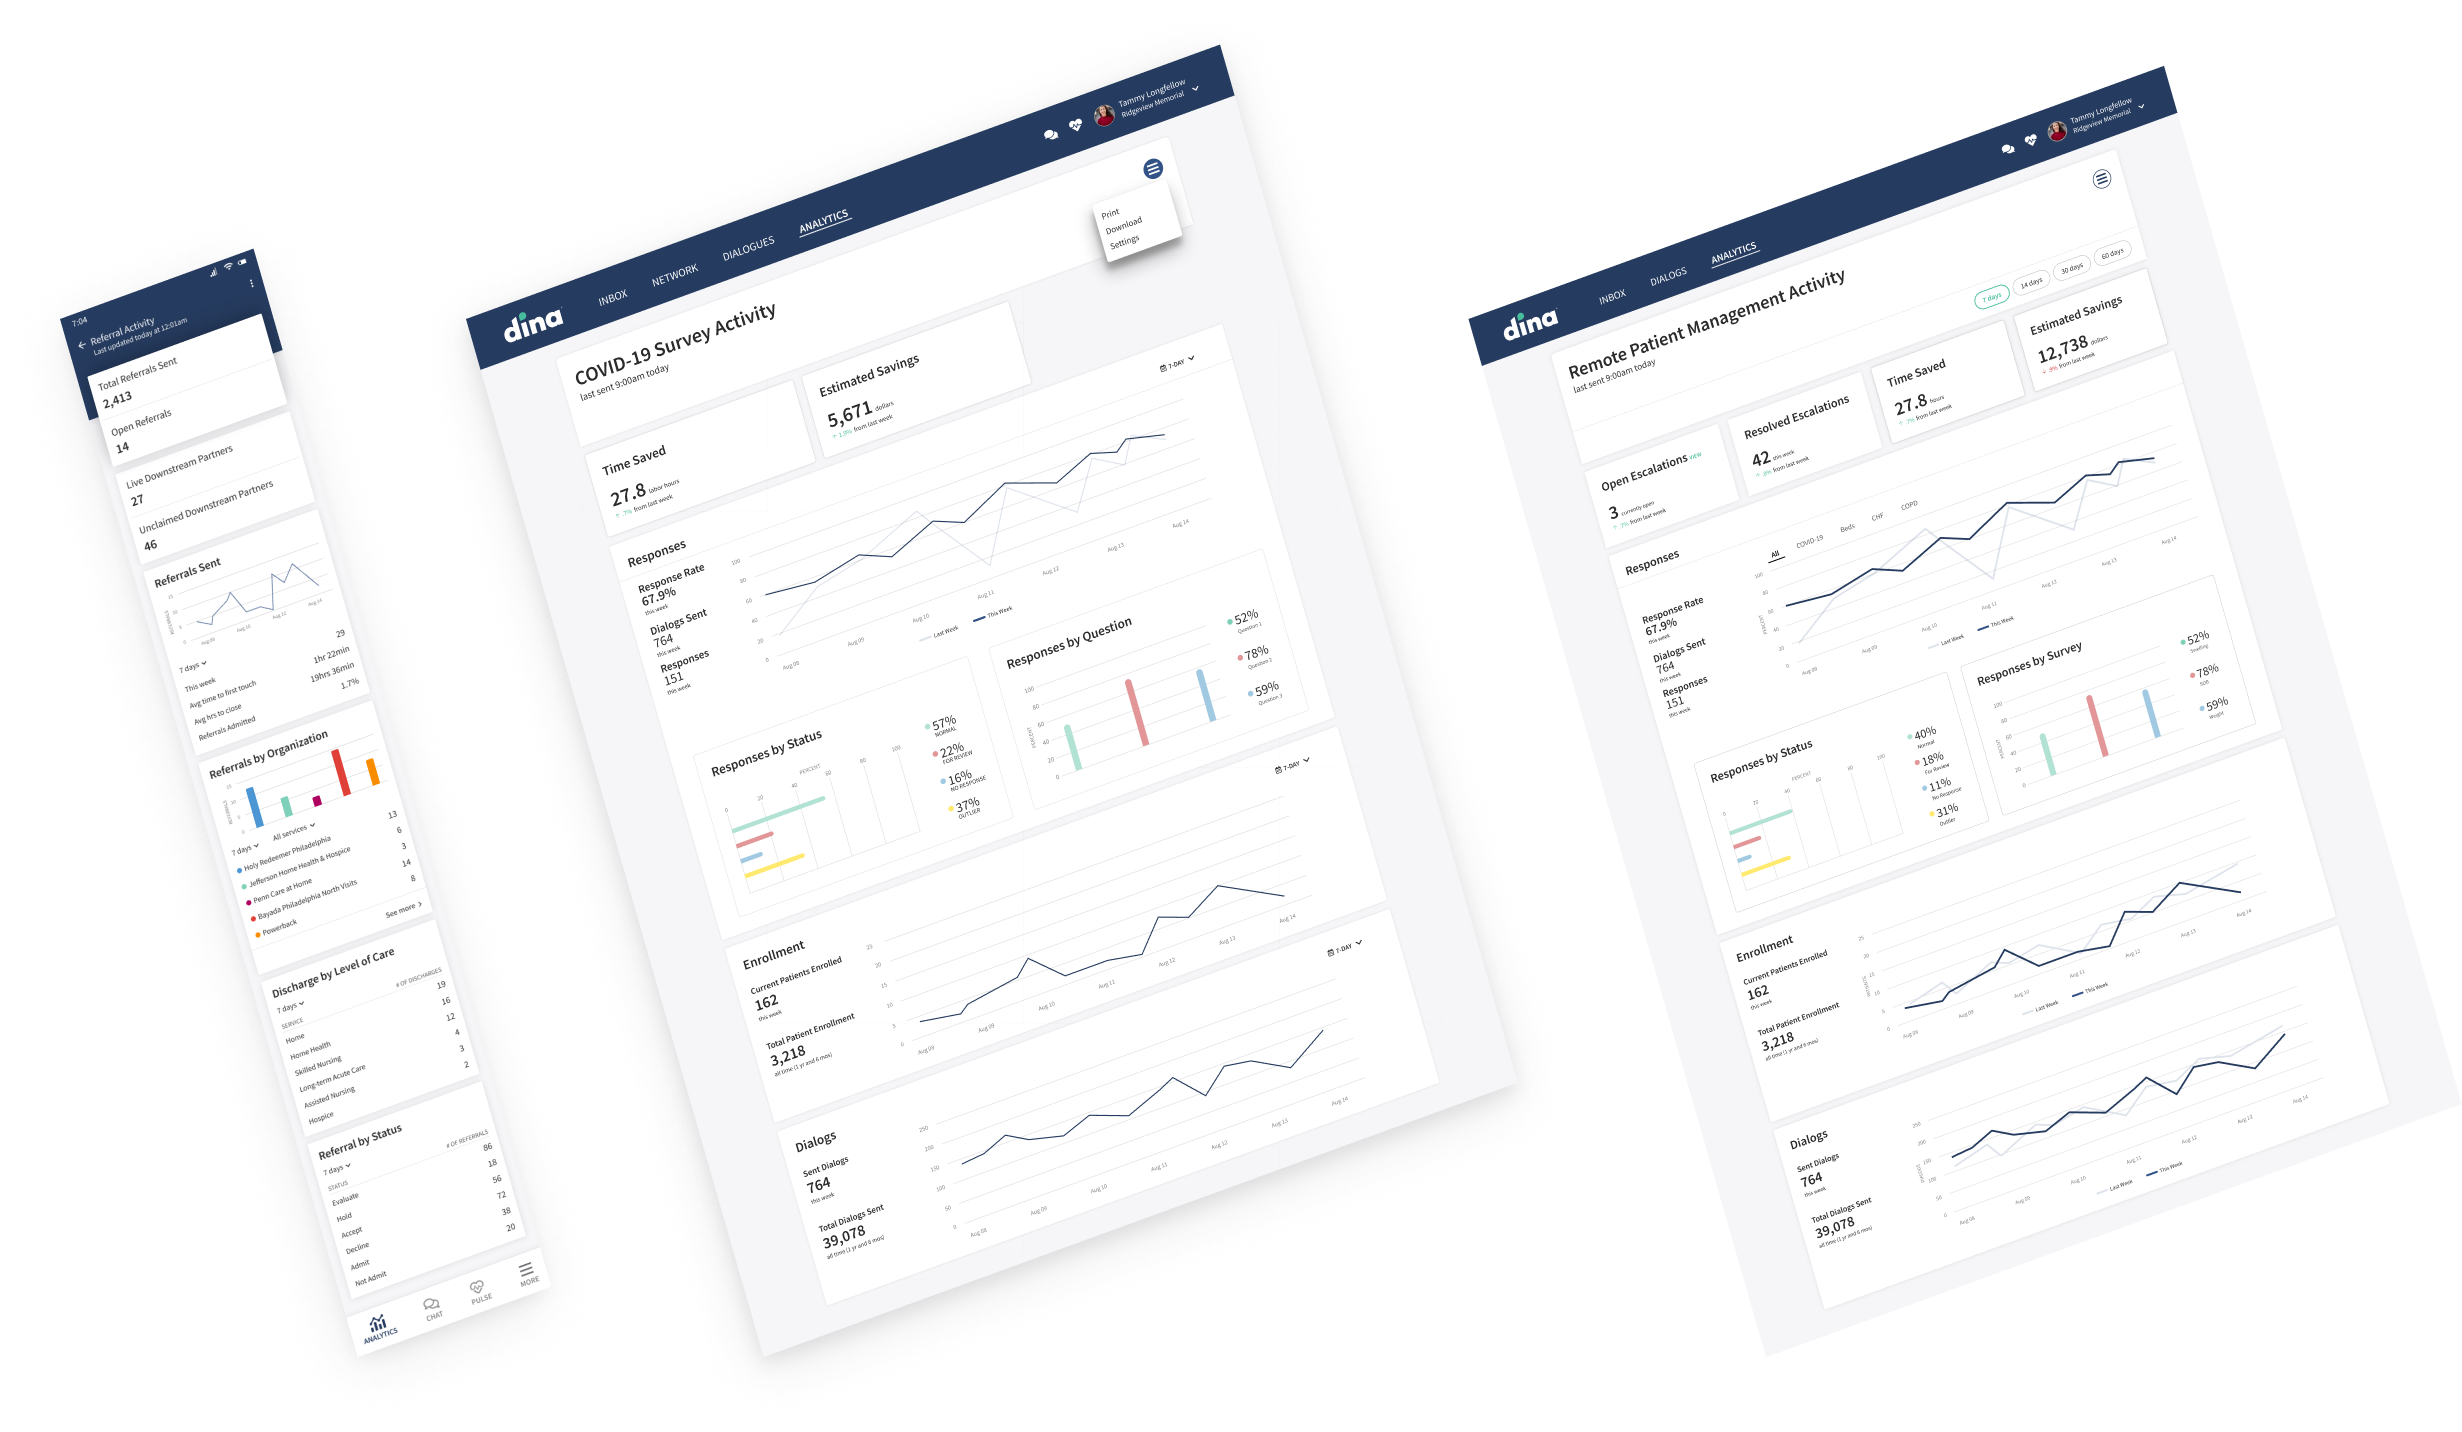 A series of dashboards I designed to enable real-time reporting for our Remote Patient Monitoring products. This feature replaced Looker reports we had been manually running and sending to our clients, thus reducing labor costs incurred from our customer success team.